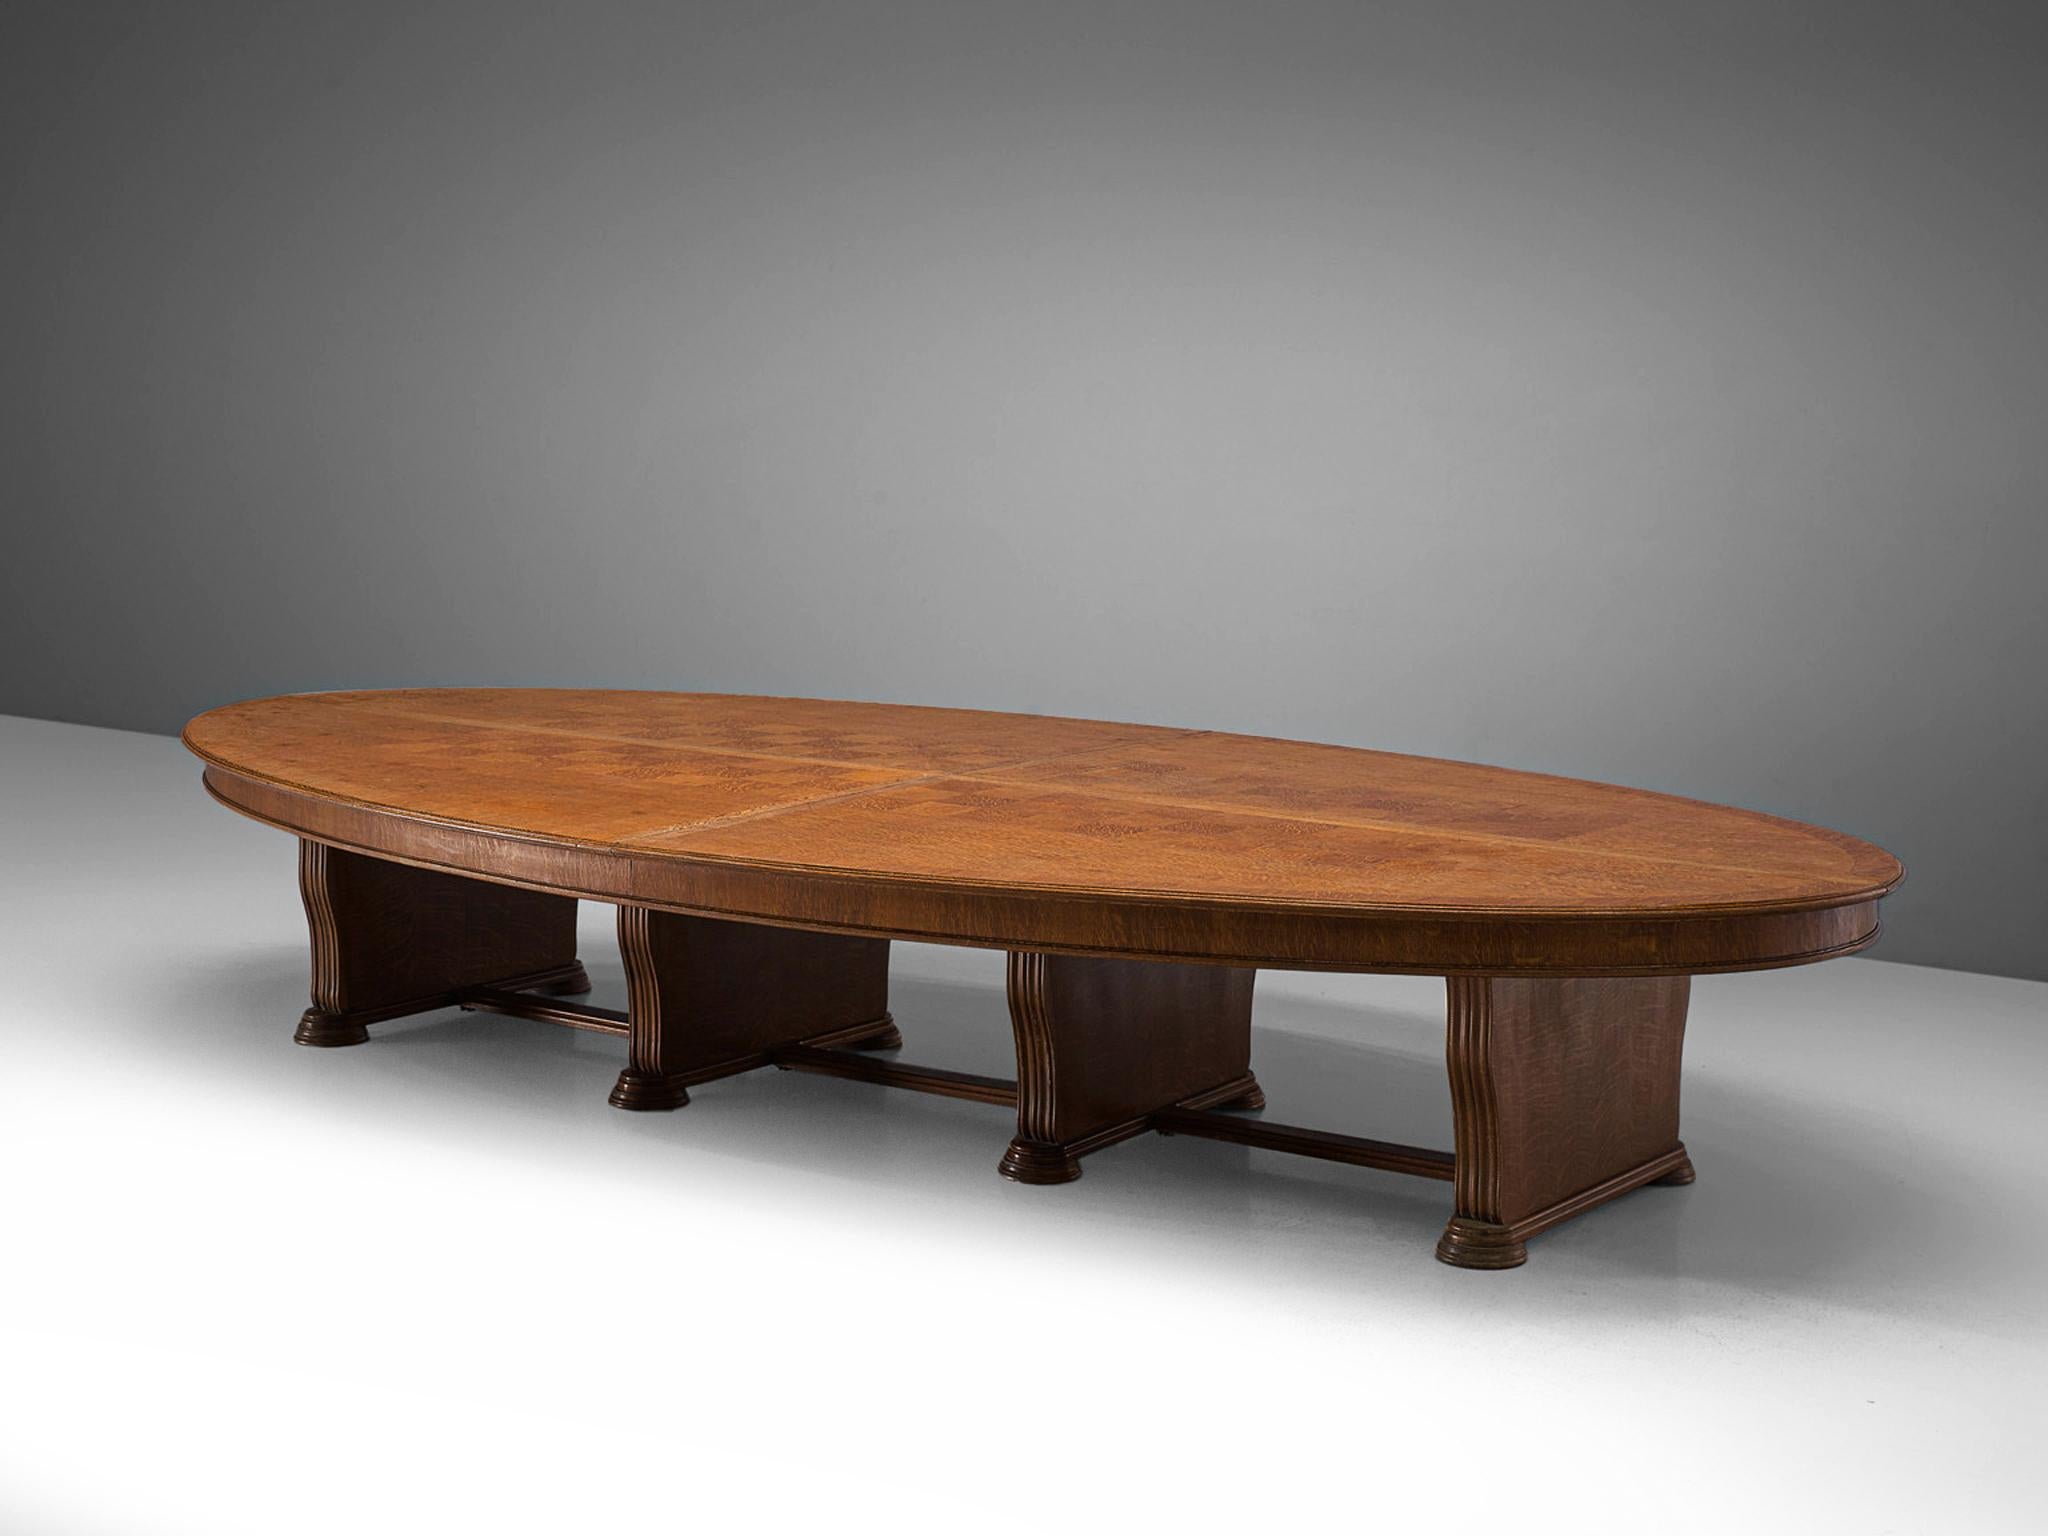 Conference or dining table, oak, Europe, 1950s. 

This robust dining table of considerable size holds stylistics traits of the Art Deco movement of the 1940s. The inlayed top with marquetry shows a beautiful checkered pattern that is created by